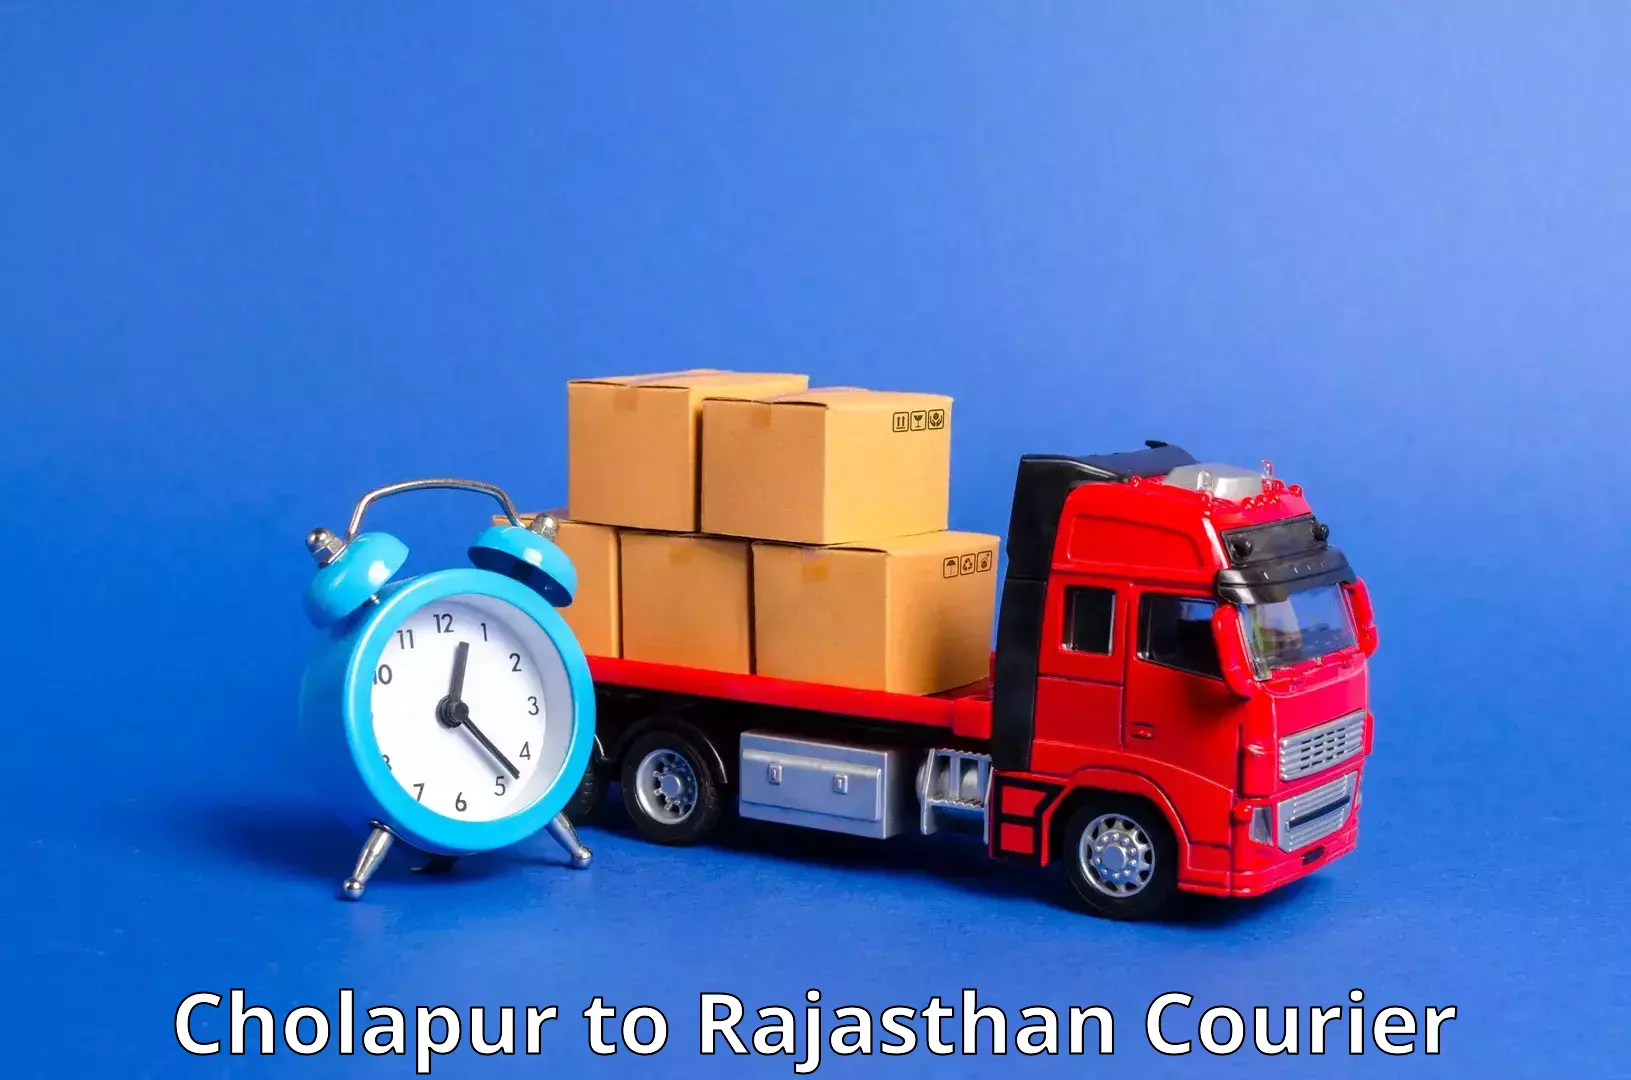 Global shipping networks Cholapur to Bajore